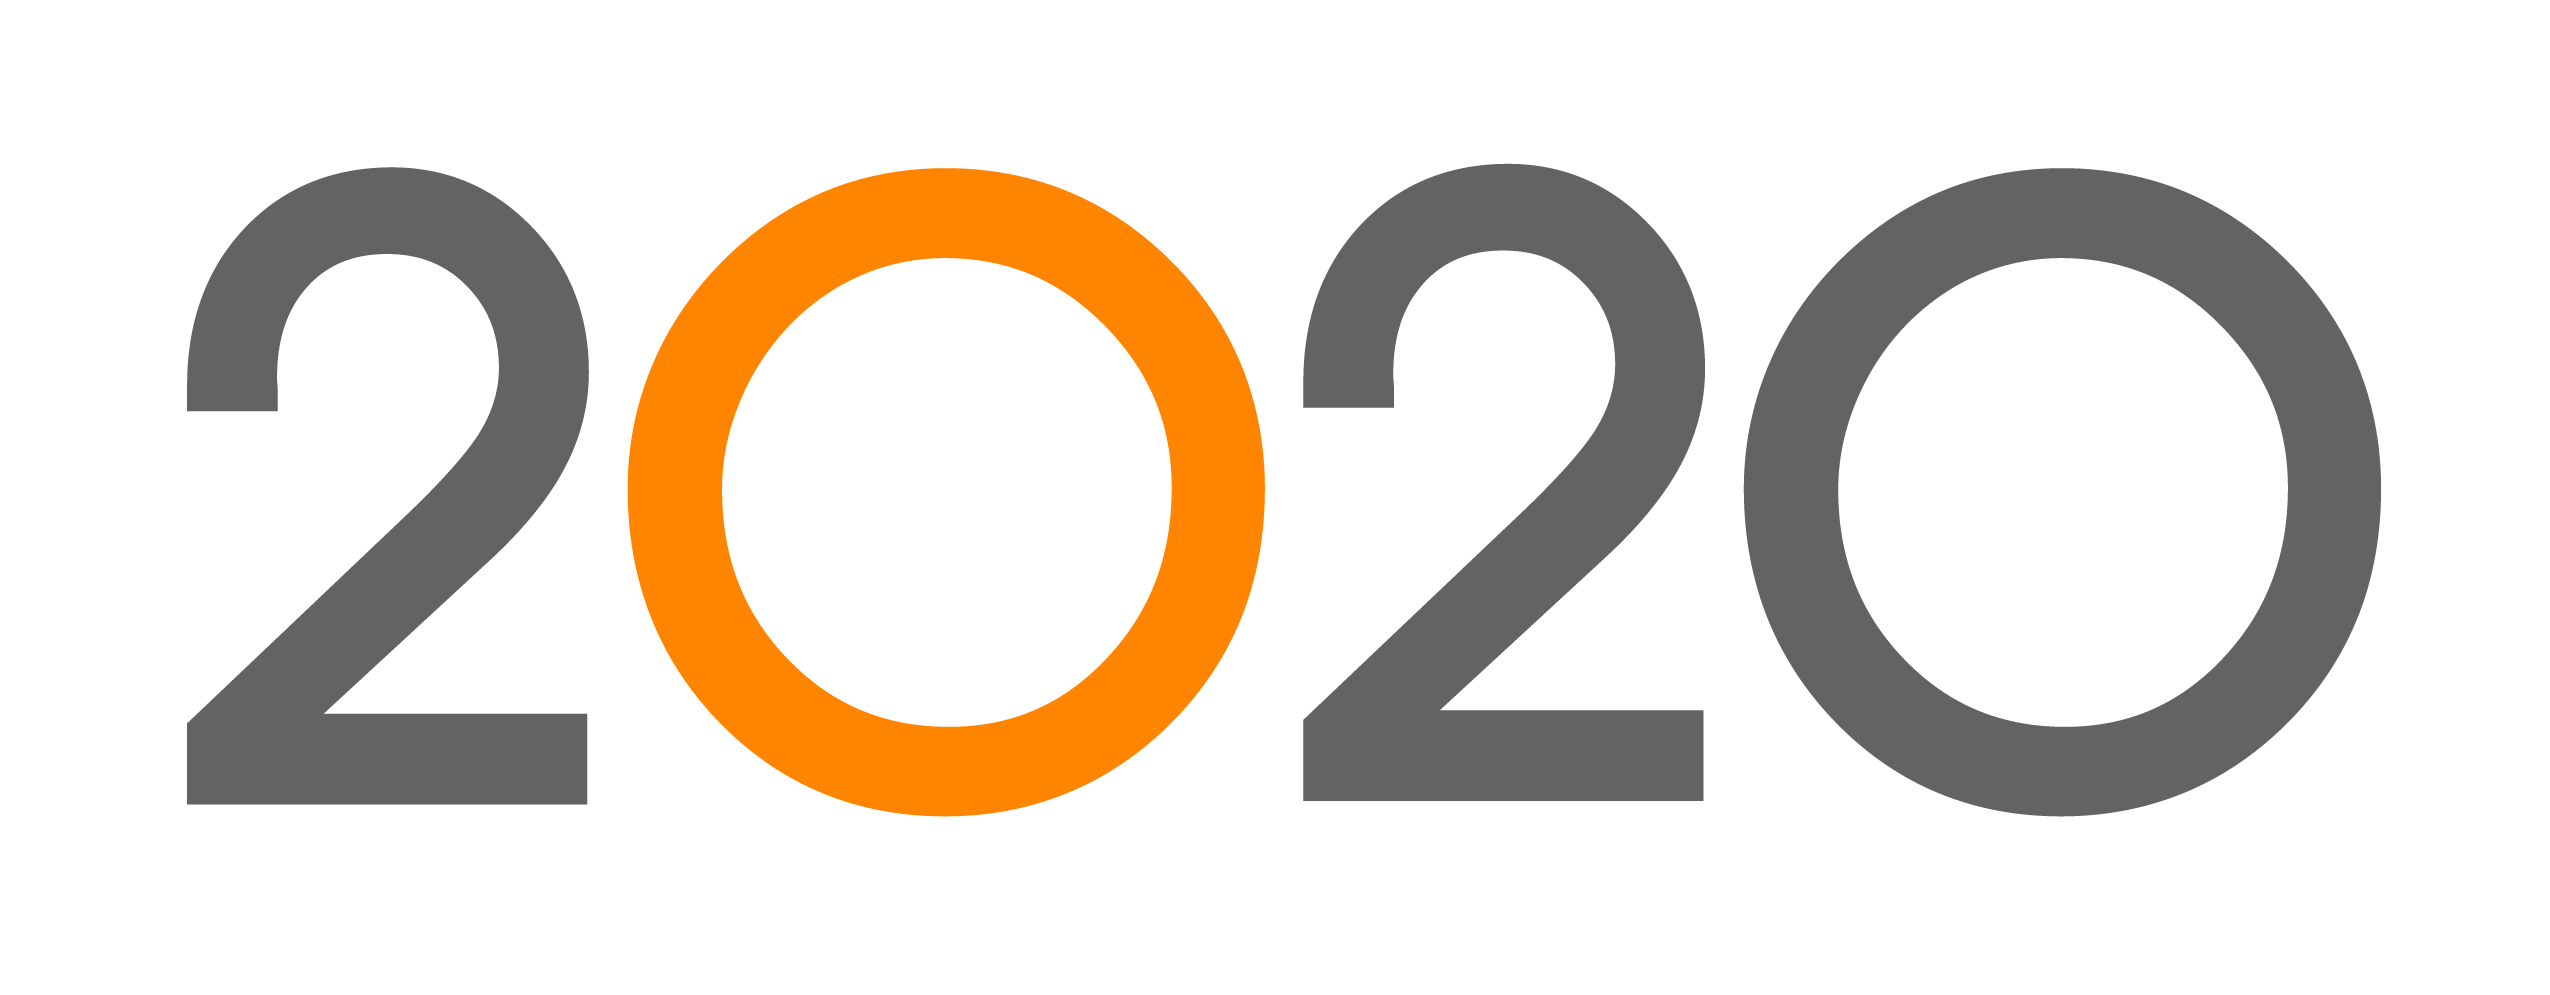 2020 Technologies today announced its new brand platform for marketing purposes.